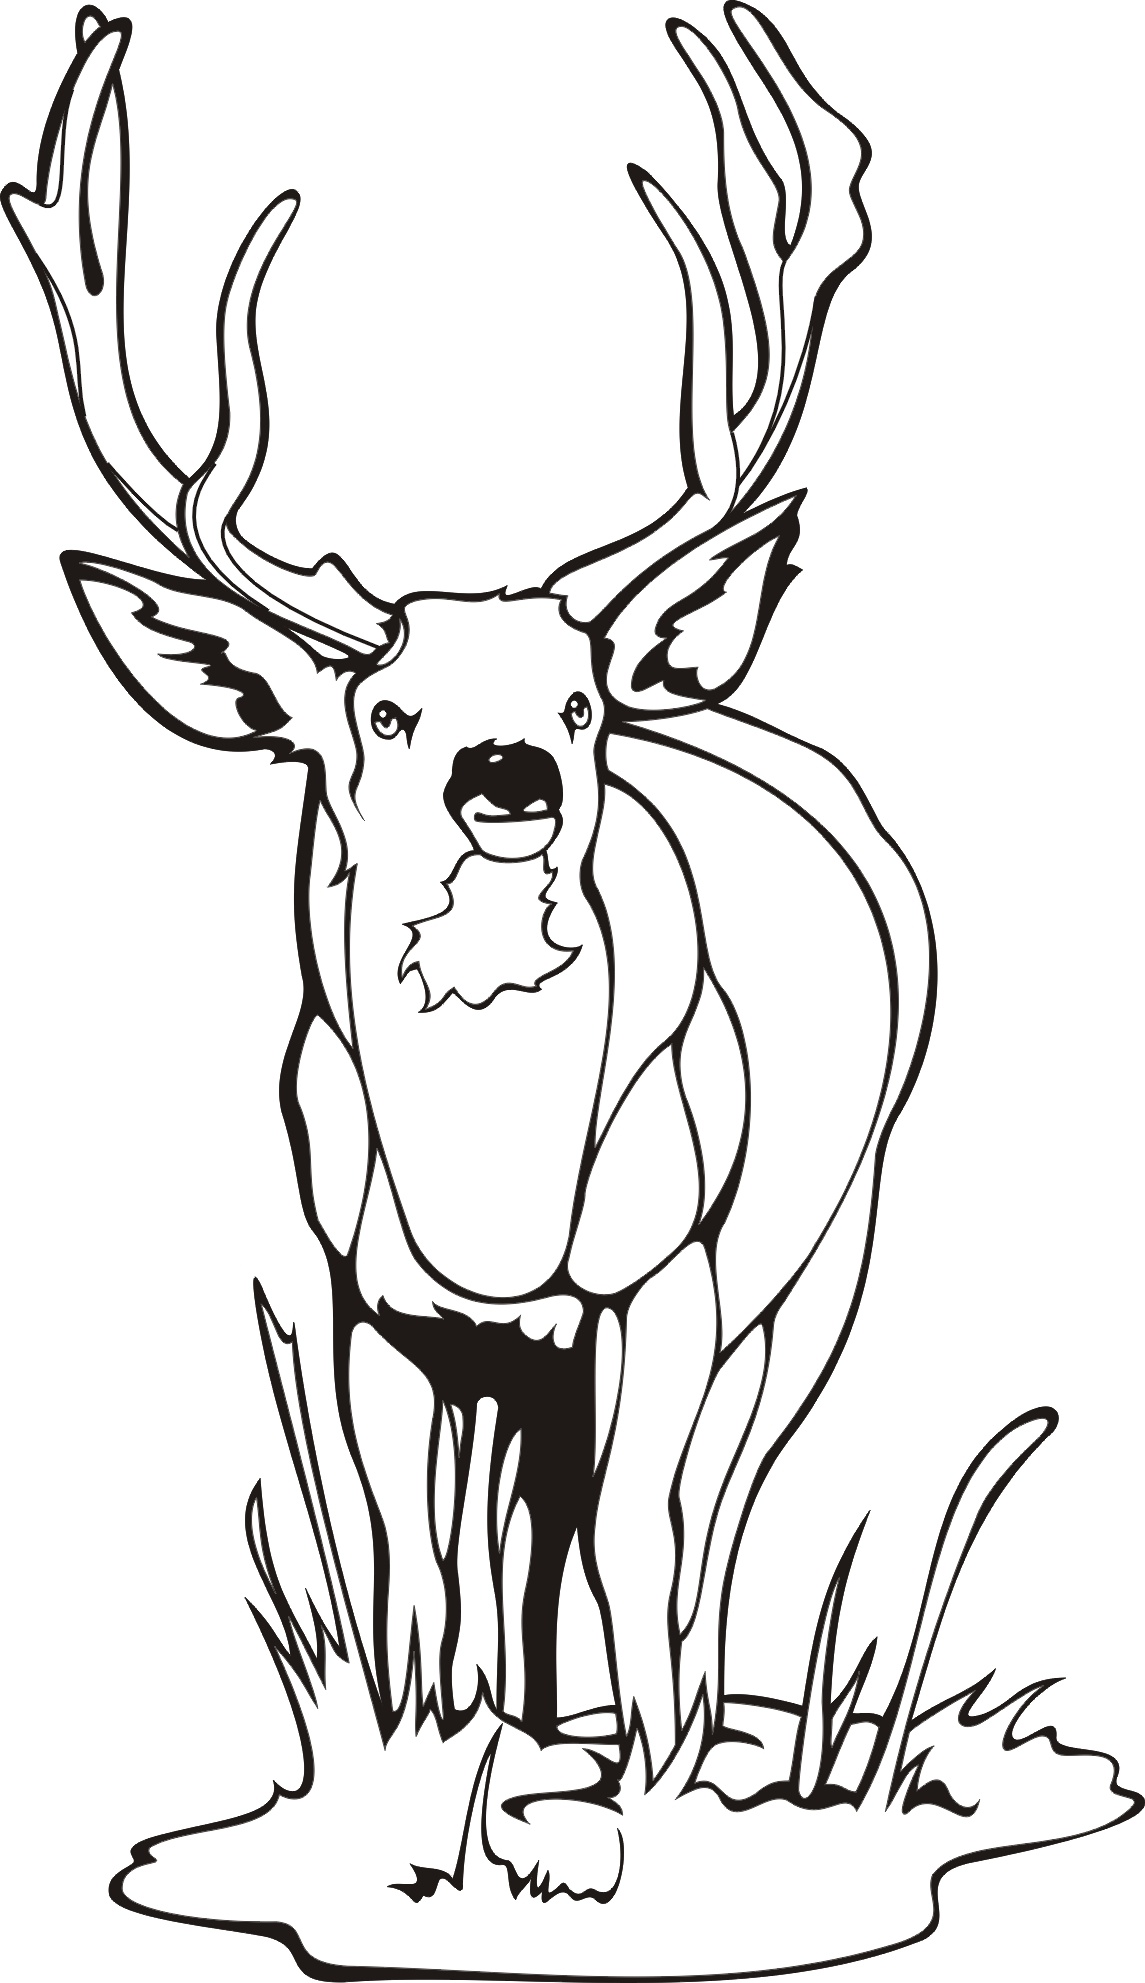 kids-deer-hunting-coloring-pages-these-drawings-can-be-a-good-outdoor